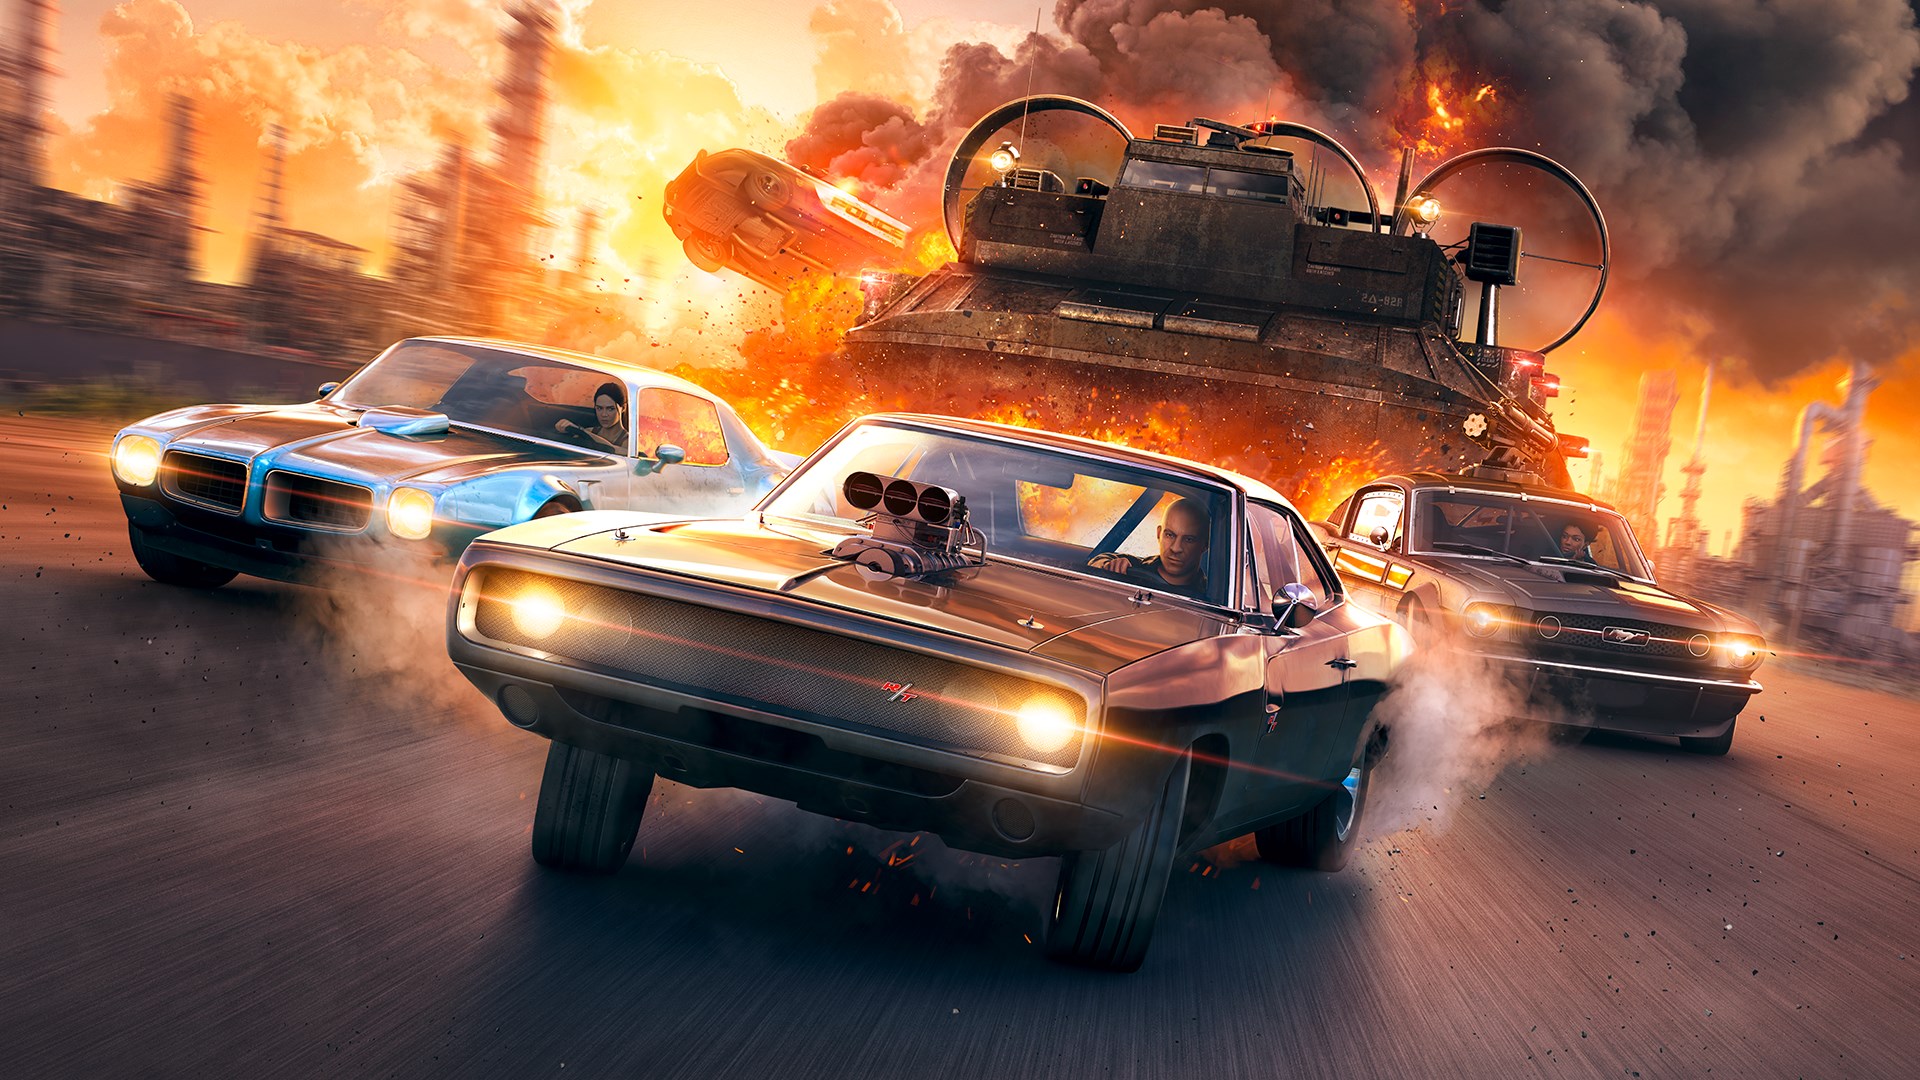 Video For FAST & FURIOUS CROSSROADS Is Now Available For Xbox One